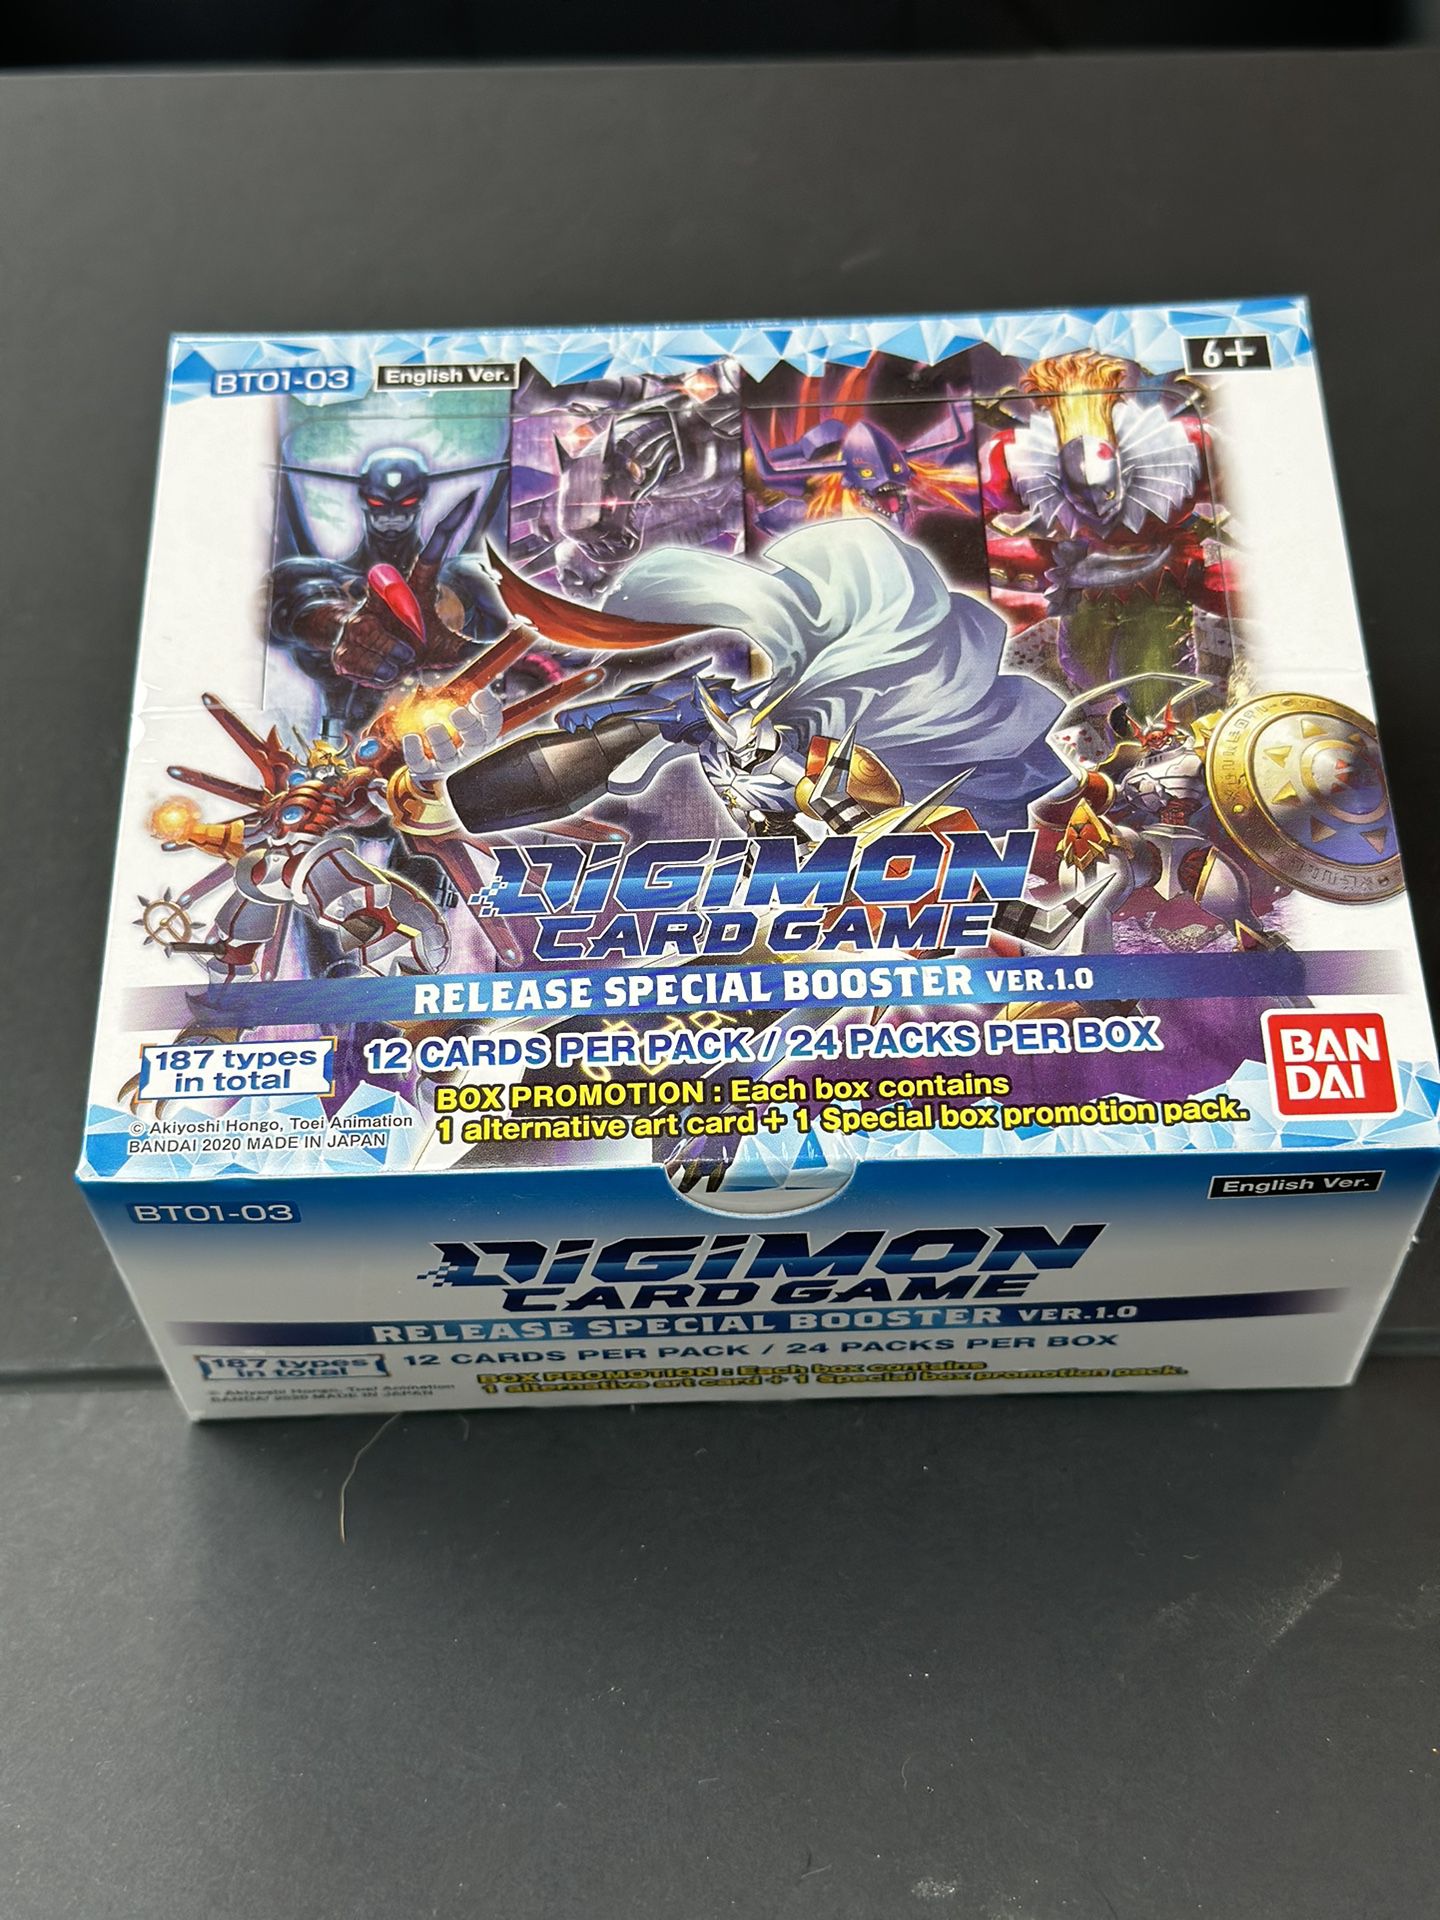 Digimon Card Game Booster Box Ver.1.0